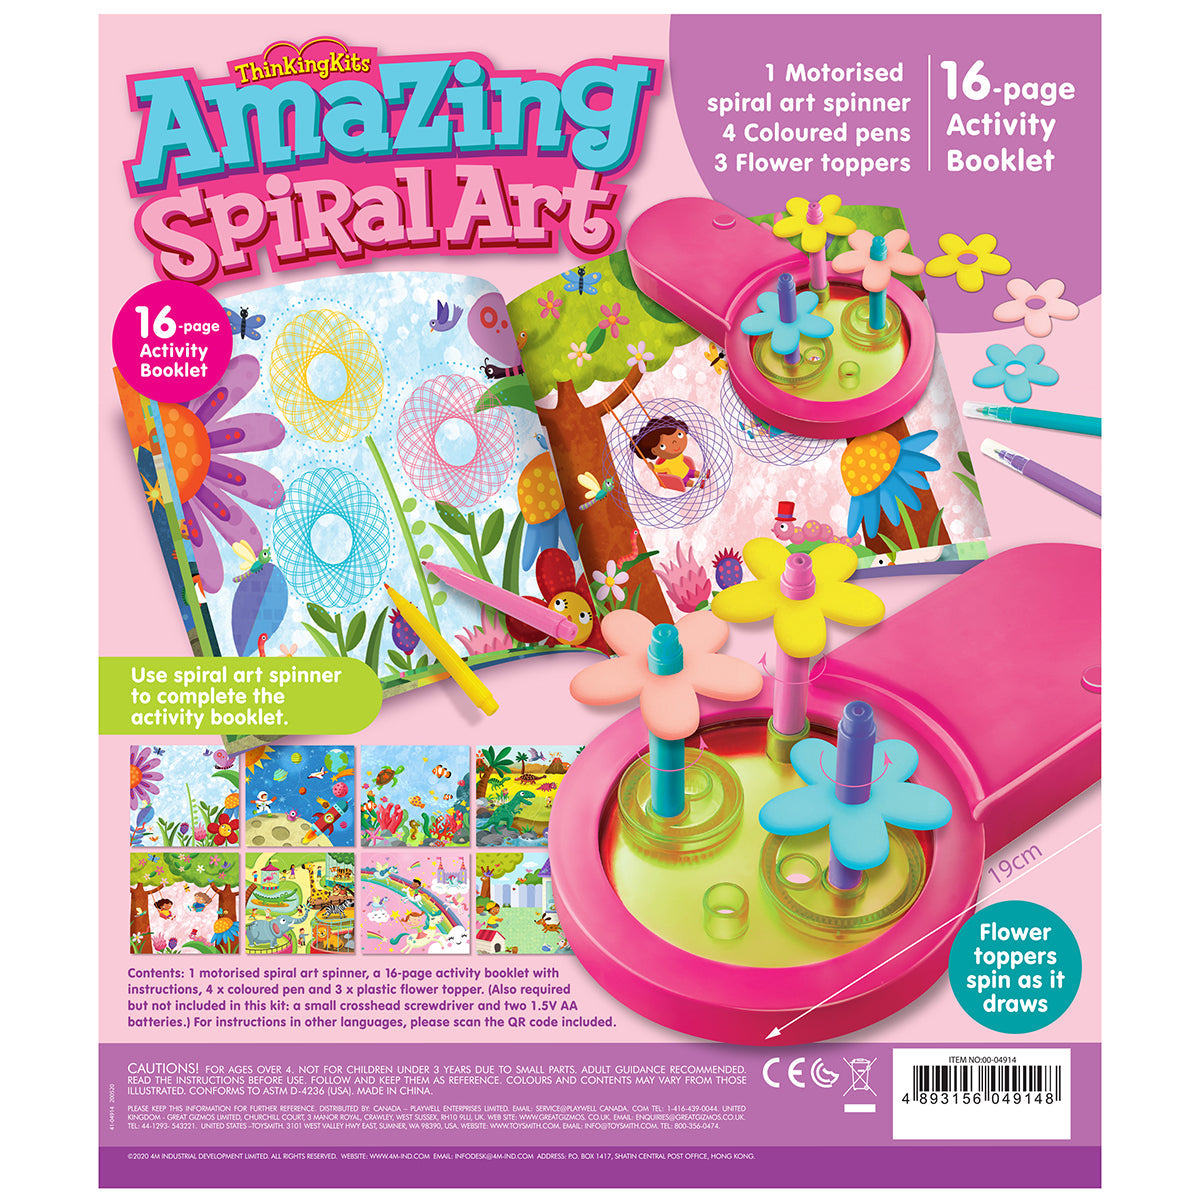 4M Toysmith, Thinking Kits Amazing Spiral Art from STEAM for Juniors,  Flower Toppers Spin as The Motorized Art Spinner Draws 16-Page Full Color